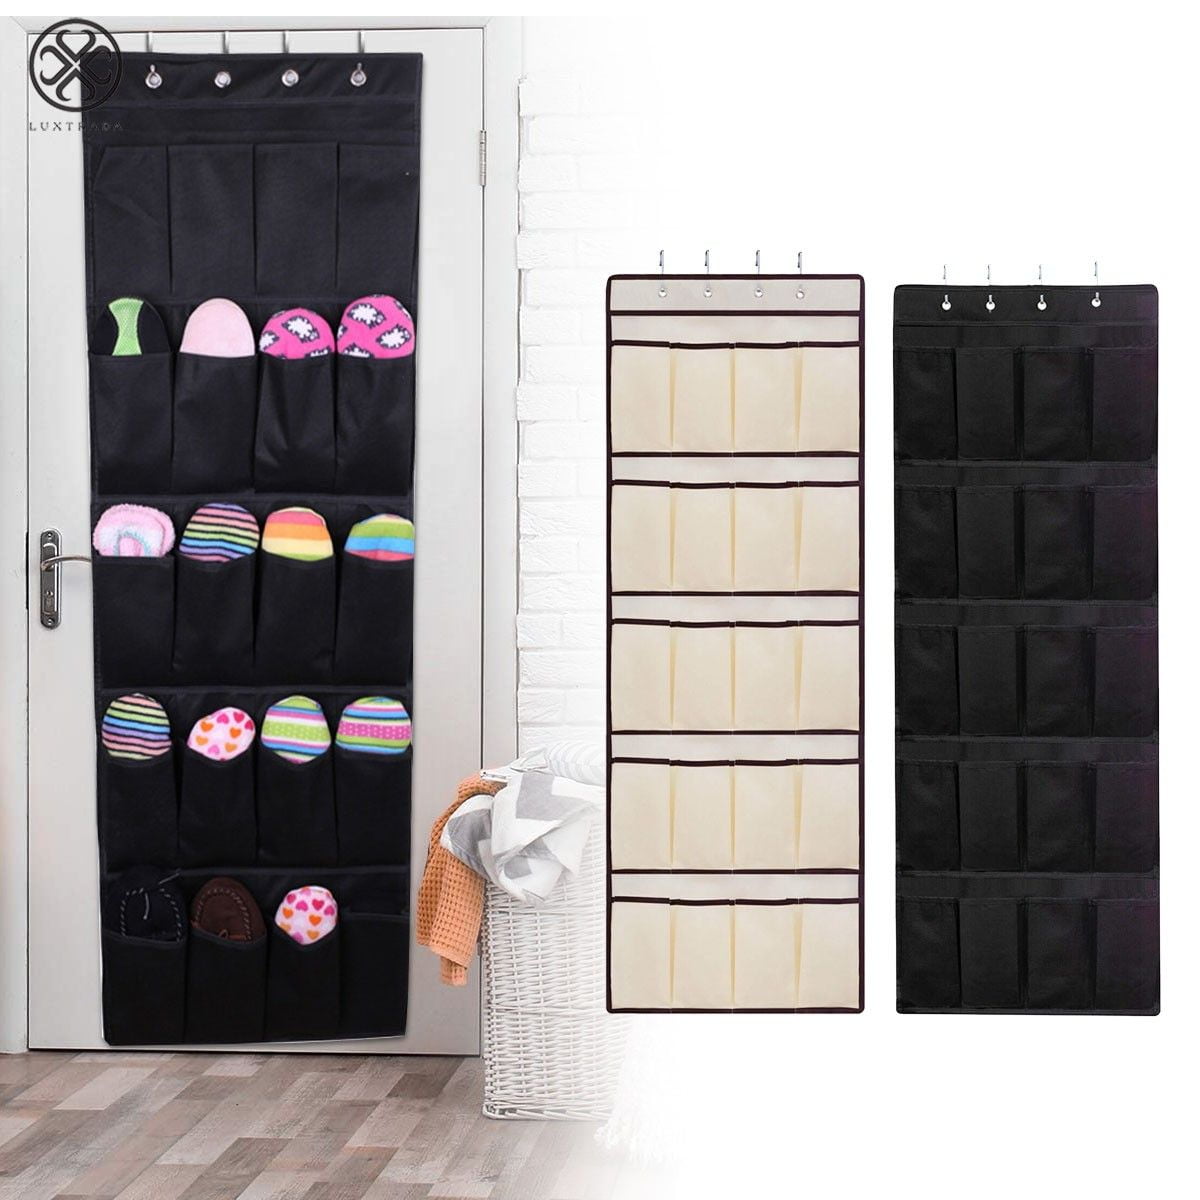 20Pocket Over the Door Shoes Rack 10-Pair Shoes Organizer 5Layer Hanging Storage 